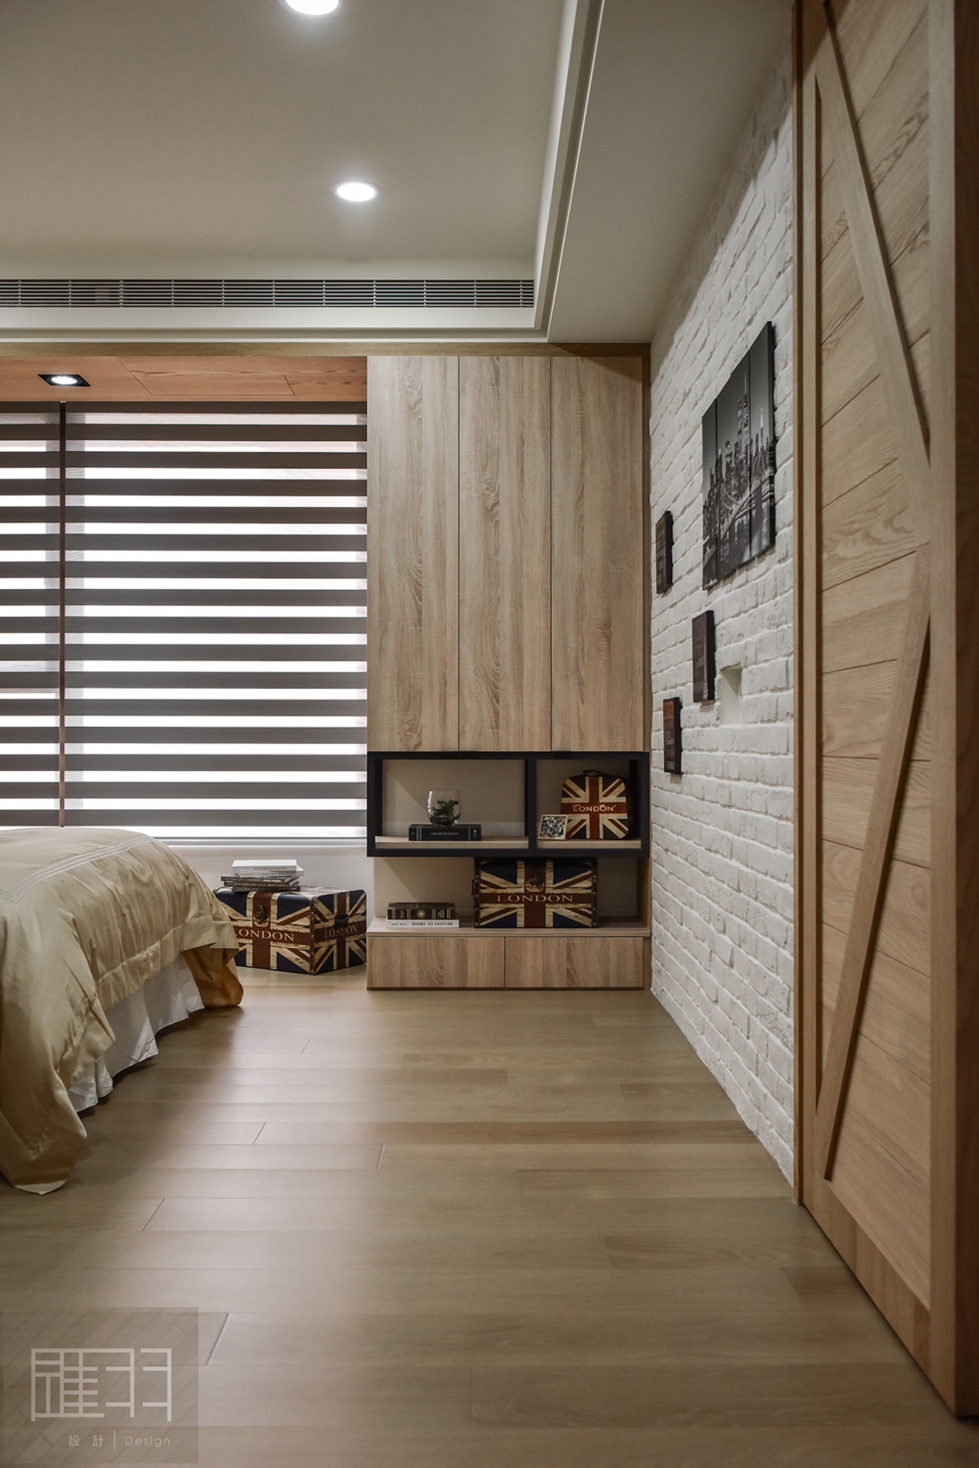 Interior Of The Apartment In Taiwan From Manson Hsiao, Hui-yu Interior Design Studio 20